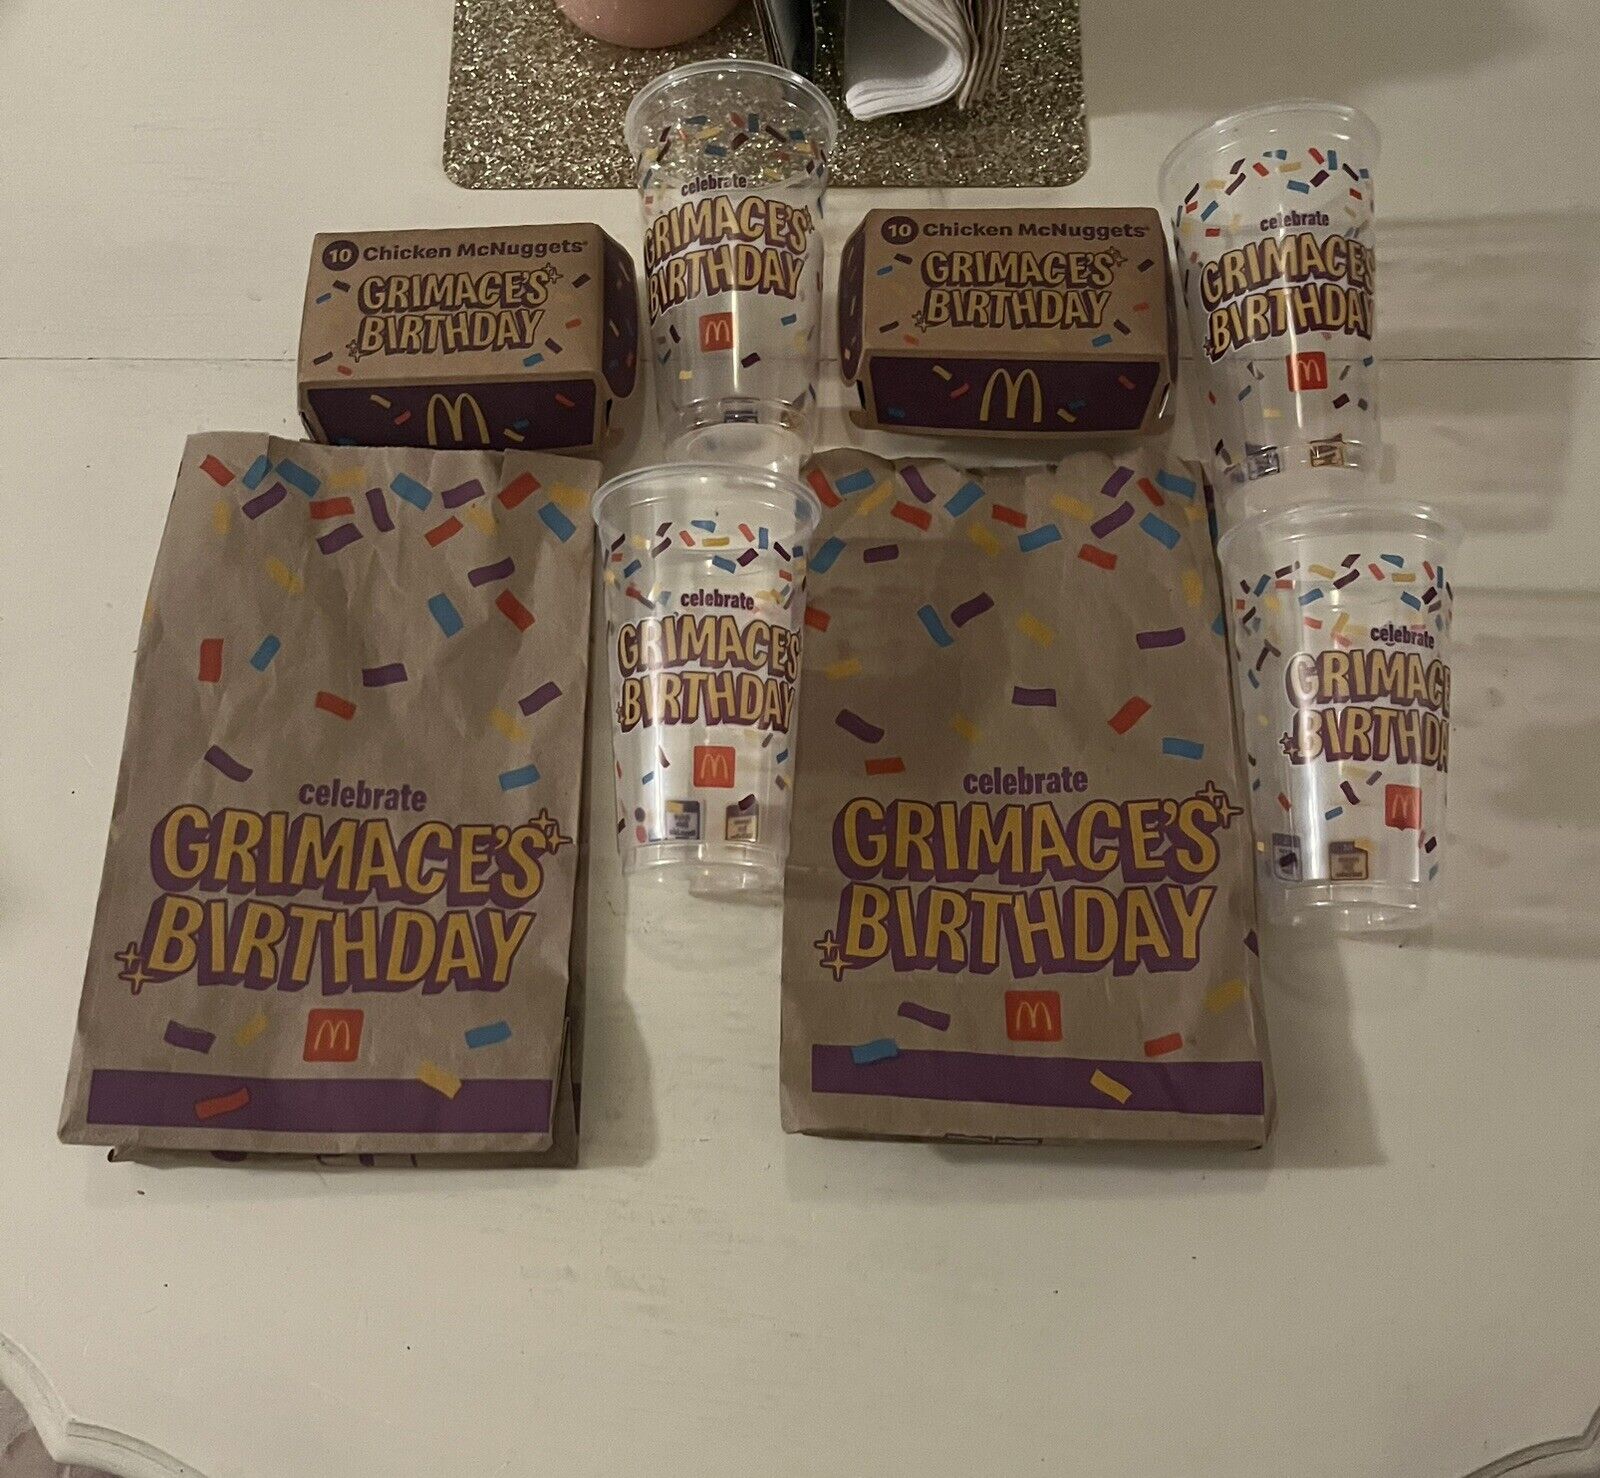 2023 Discontinued Grimaces Birthday McDonald’s Bag, Cups, Boxes 